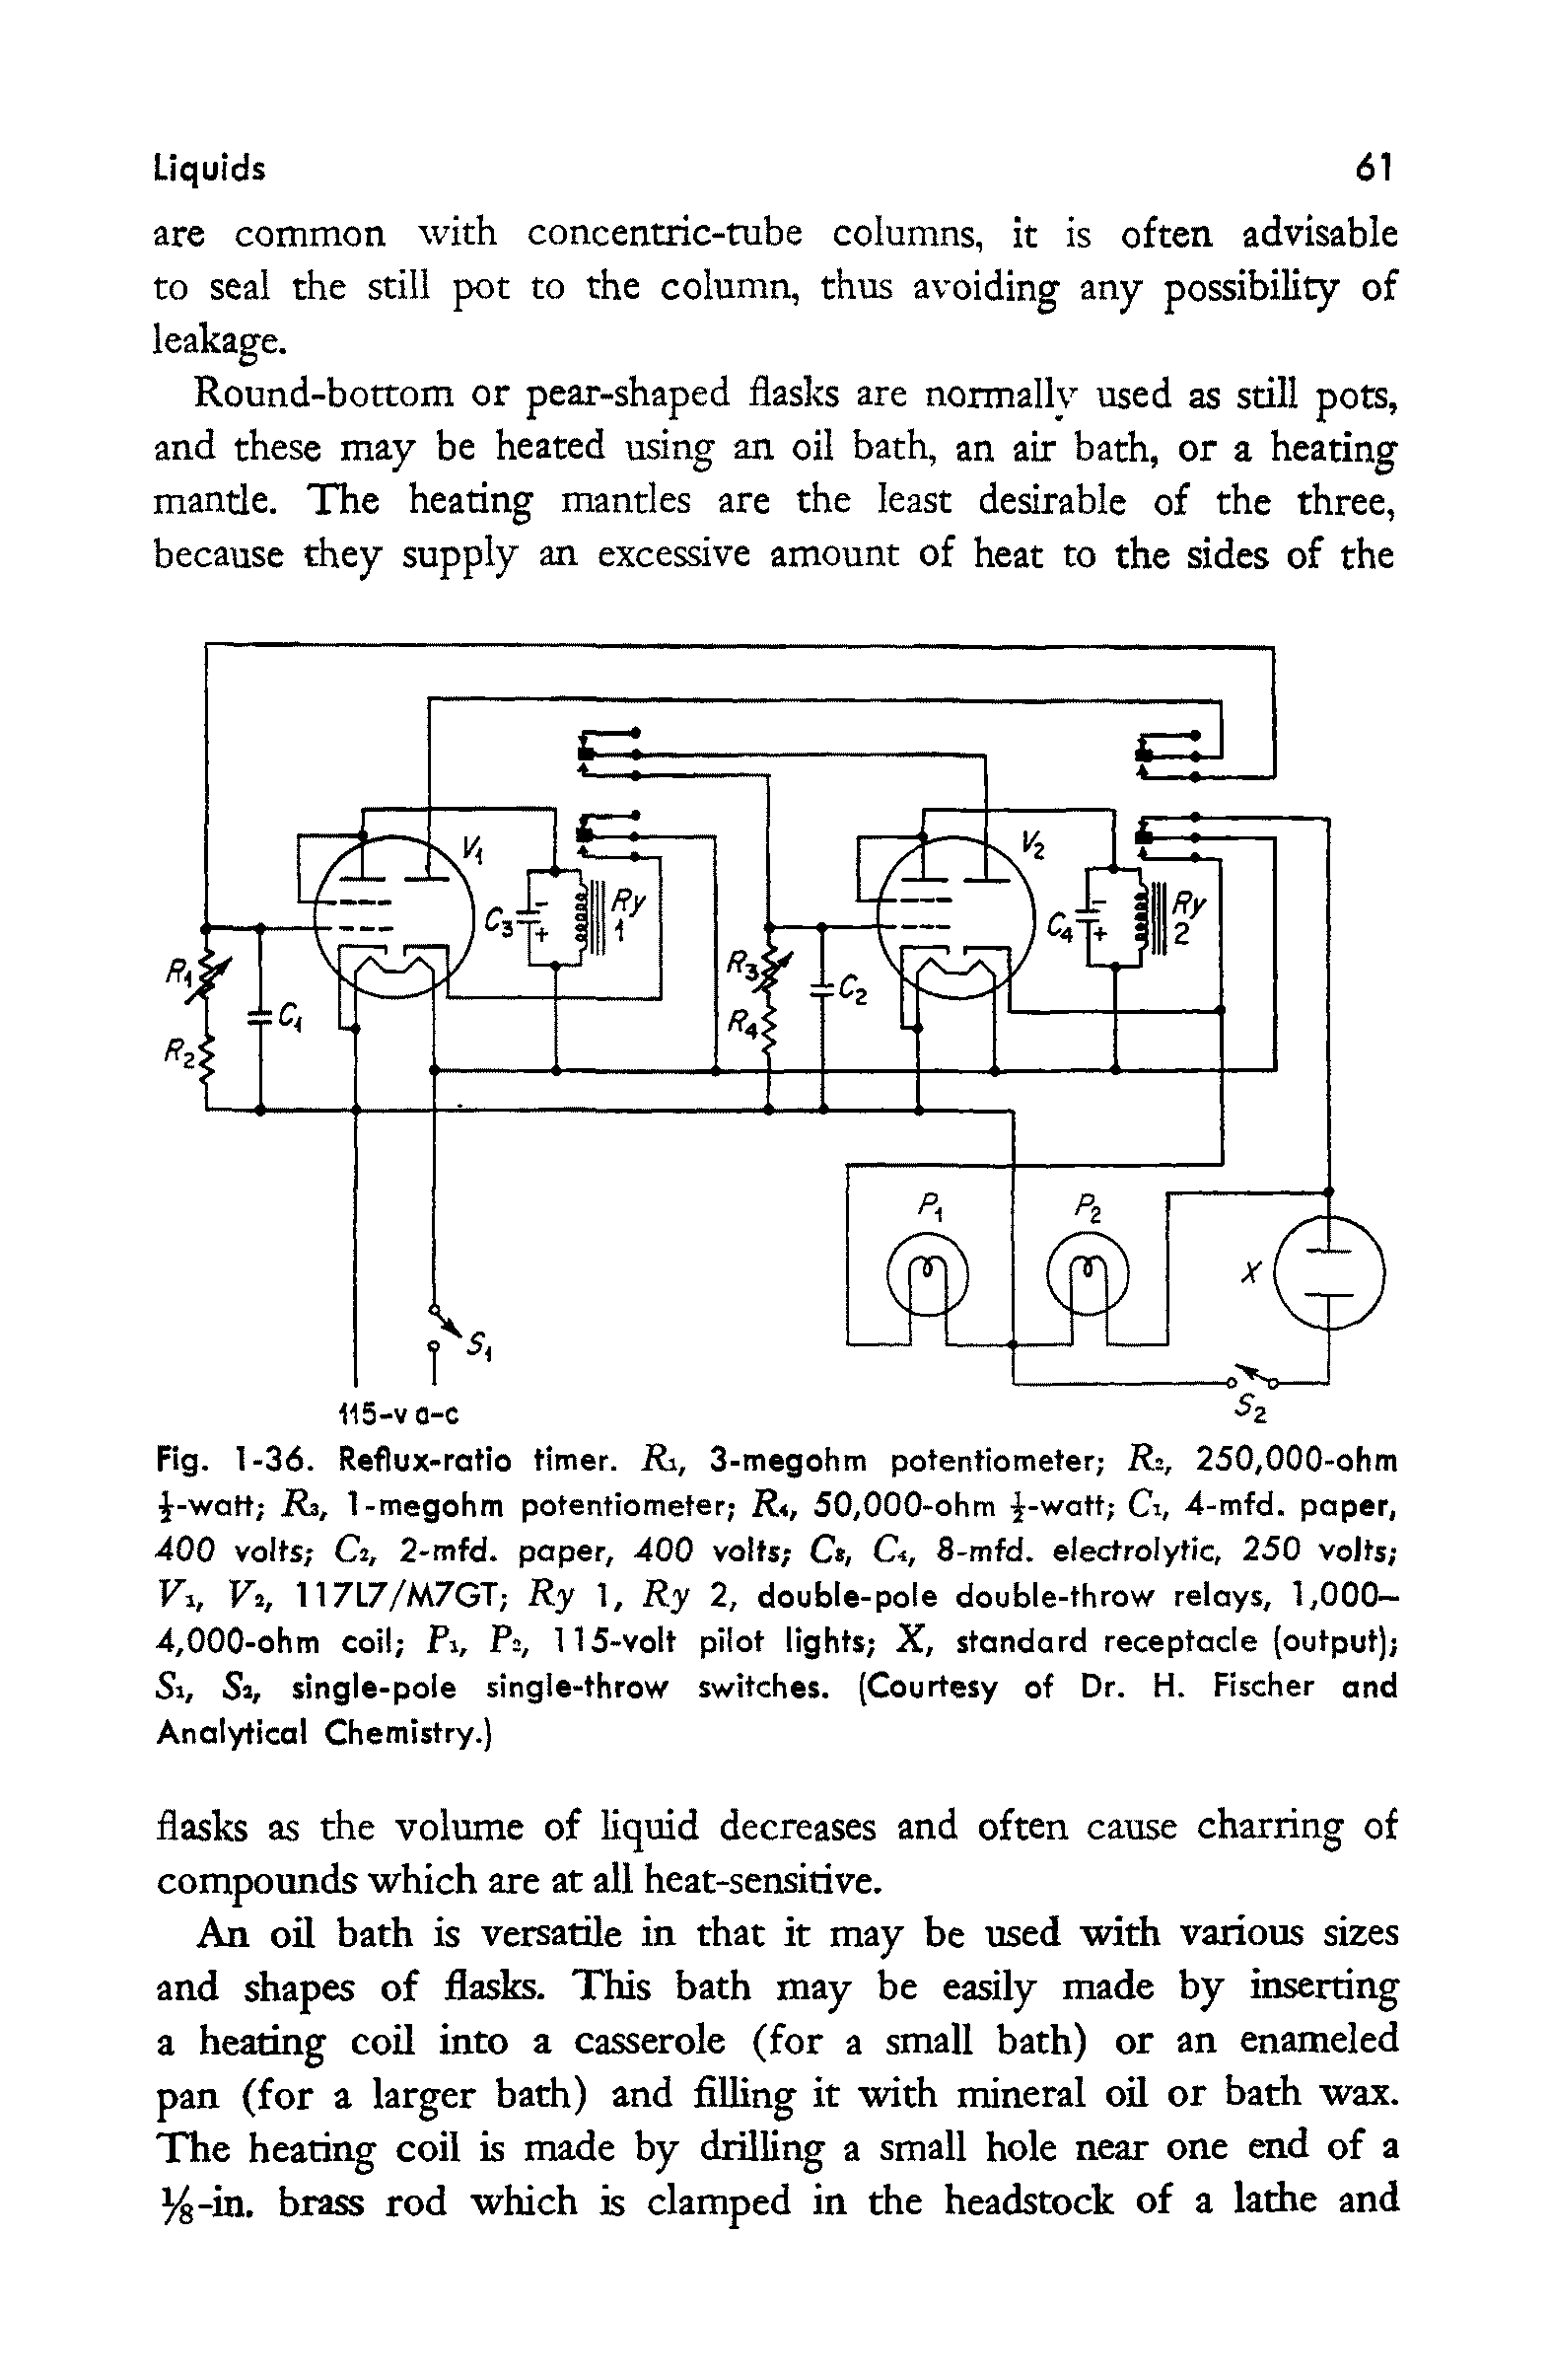 Fig. 1-36. Reflux-ratio timer. Ri, 3-megohm potentiometer R , 250,000-ohm J-watt Ra, 1-megohm potentiometer Rt, 50,000-ohm -watt Ci, 4-mfd. paper, 400 volts Cl, 2-mfd. paper, 400 volts Ct, C<, 8-mfd. electrolytic, 250 volts Vt, Fa, 117L7/M7GT Ry 1, Ry 2, double-pole double-throw relays, 1,000— 4,000-ohm coil Pi, Pa, 115-volt pilot lights X, standard receptacle (output) Si, Sa, single-pole single-throw switches. (Courtesy of Dr. H. Fischer and Analytical Chemistry.)...